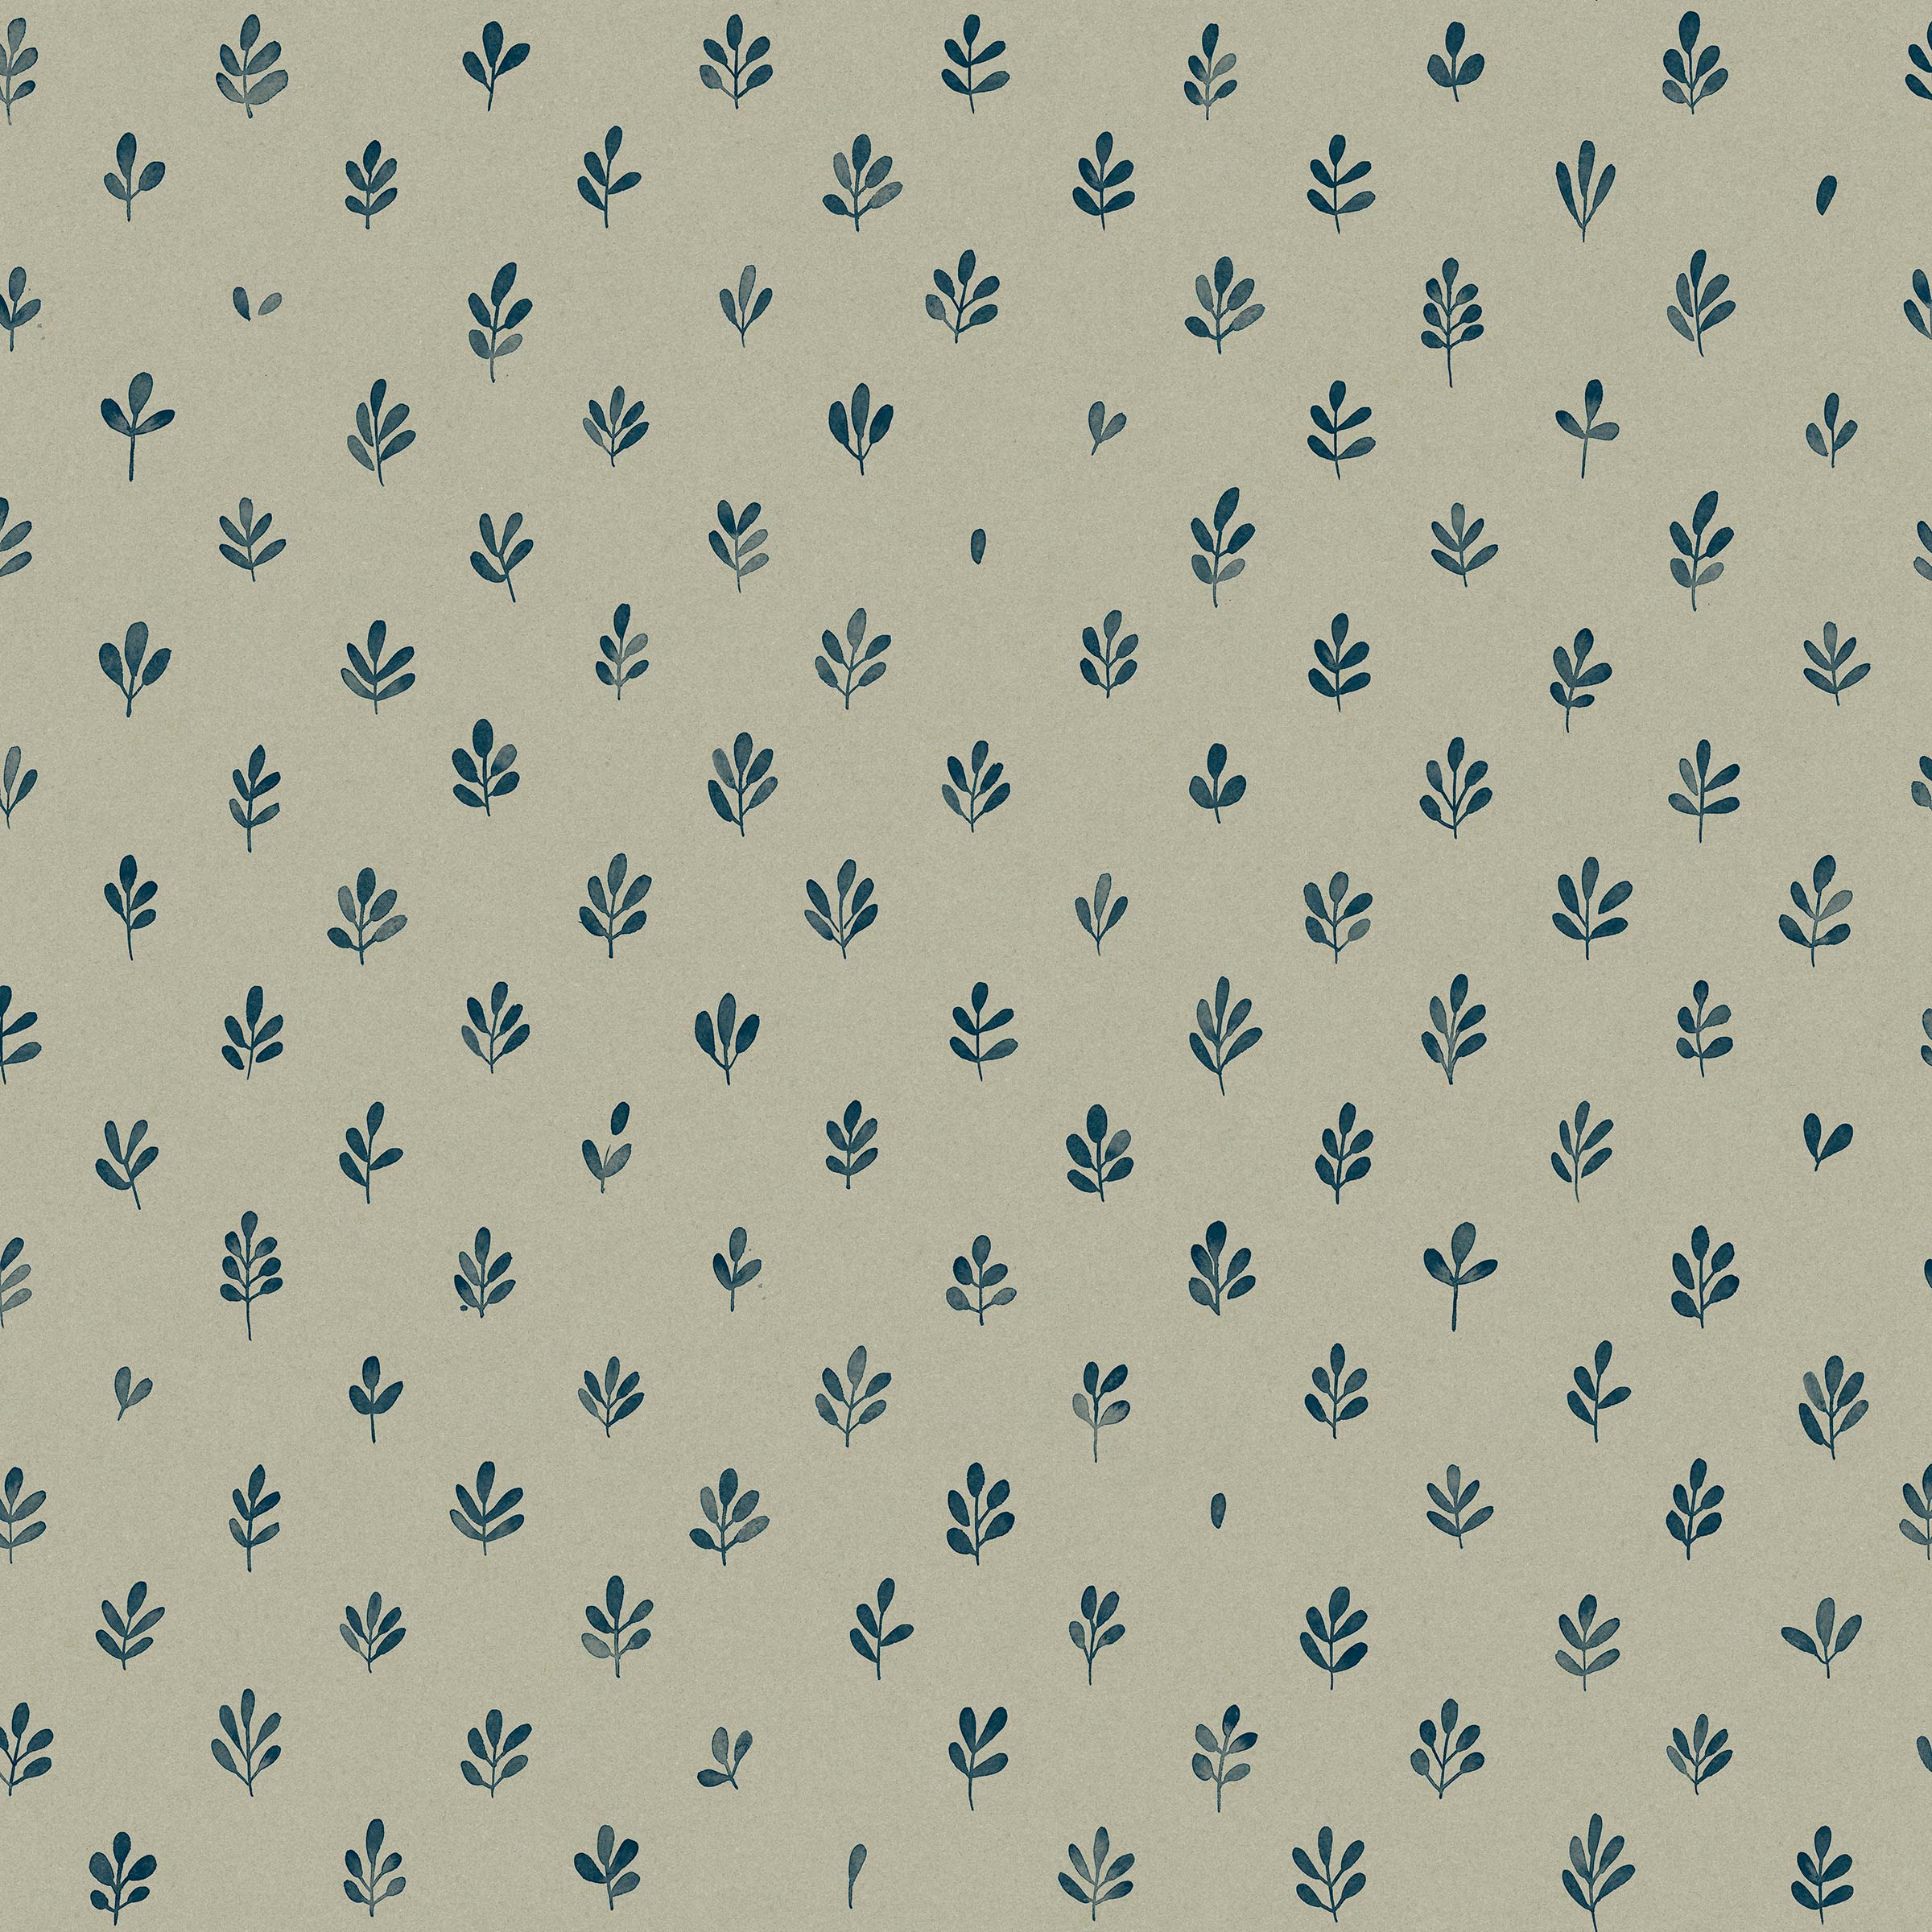 Detail of wallpaper in a repeating leaf print in navy on a sage field.